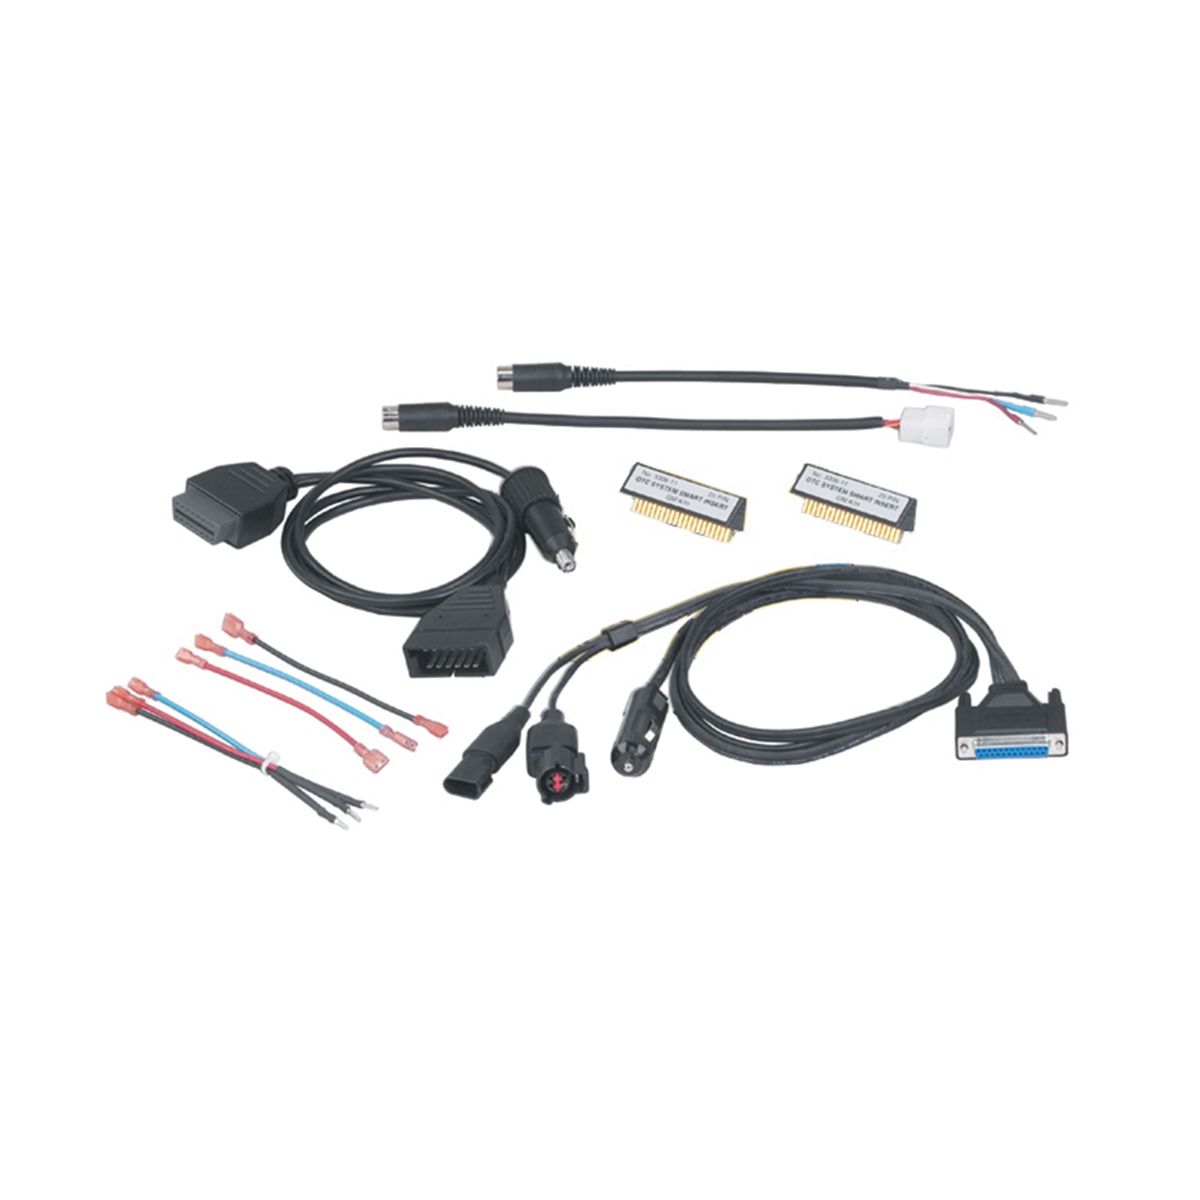 Genisys ABS Adaptor / Cable Kit